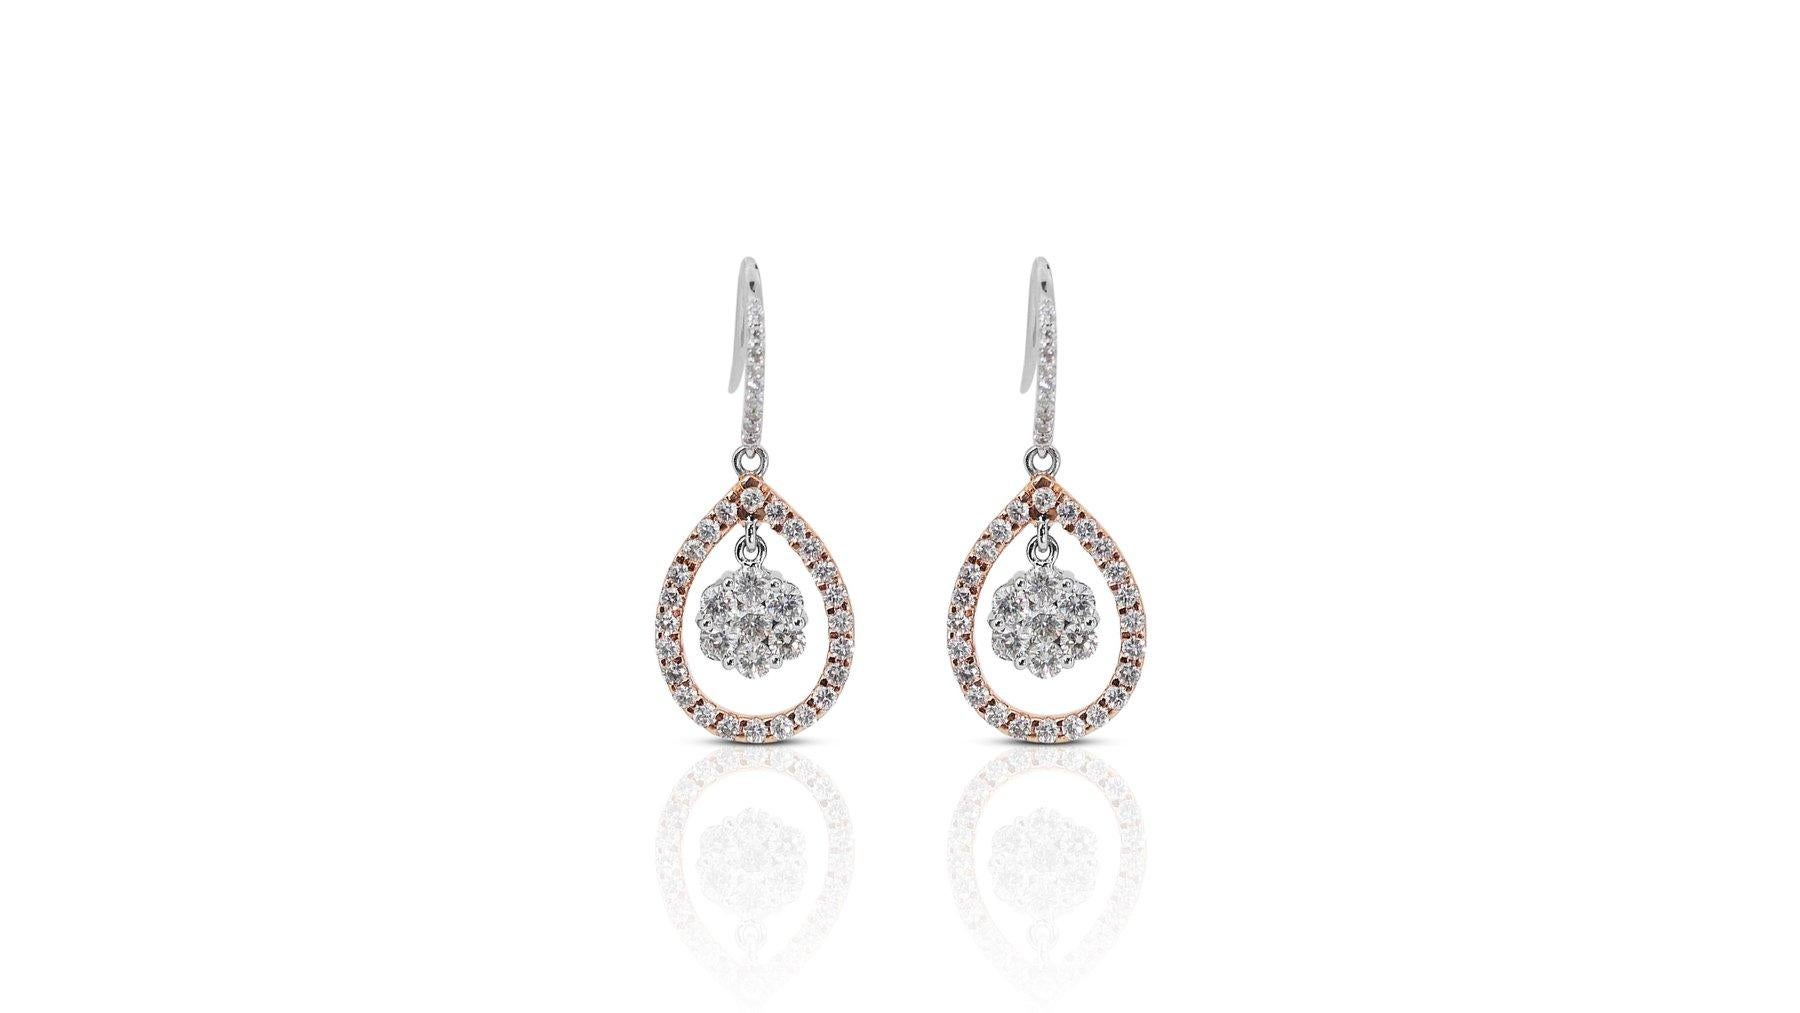 These stunning diamond earrings feature a dazzling 2.35 carat round brilliant cut diamond as the main stone. The diamond is F-G in color and VS2-SI1 in clarity, with a VG-G cut grade. The earrings are made of 18K white gold with a high quality